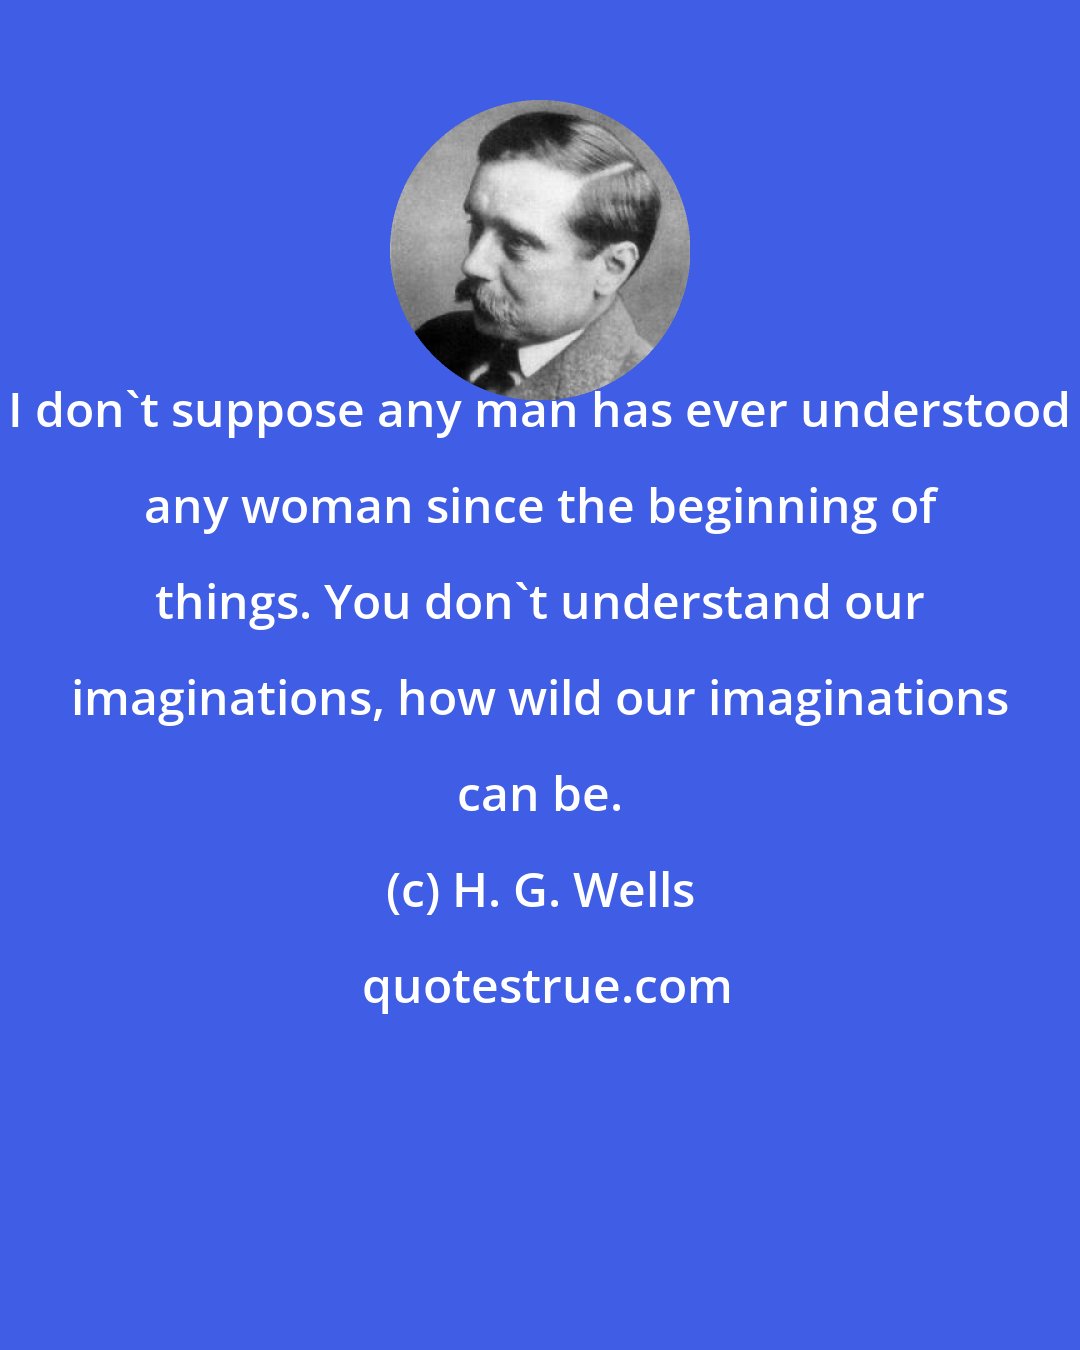 H. G. Wells: I don't suppose any man has ever understood any woman since the beginning of things. You don't understand our imaginations, how wild our imaginations can be.